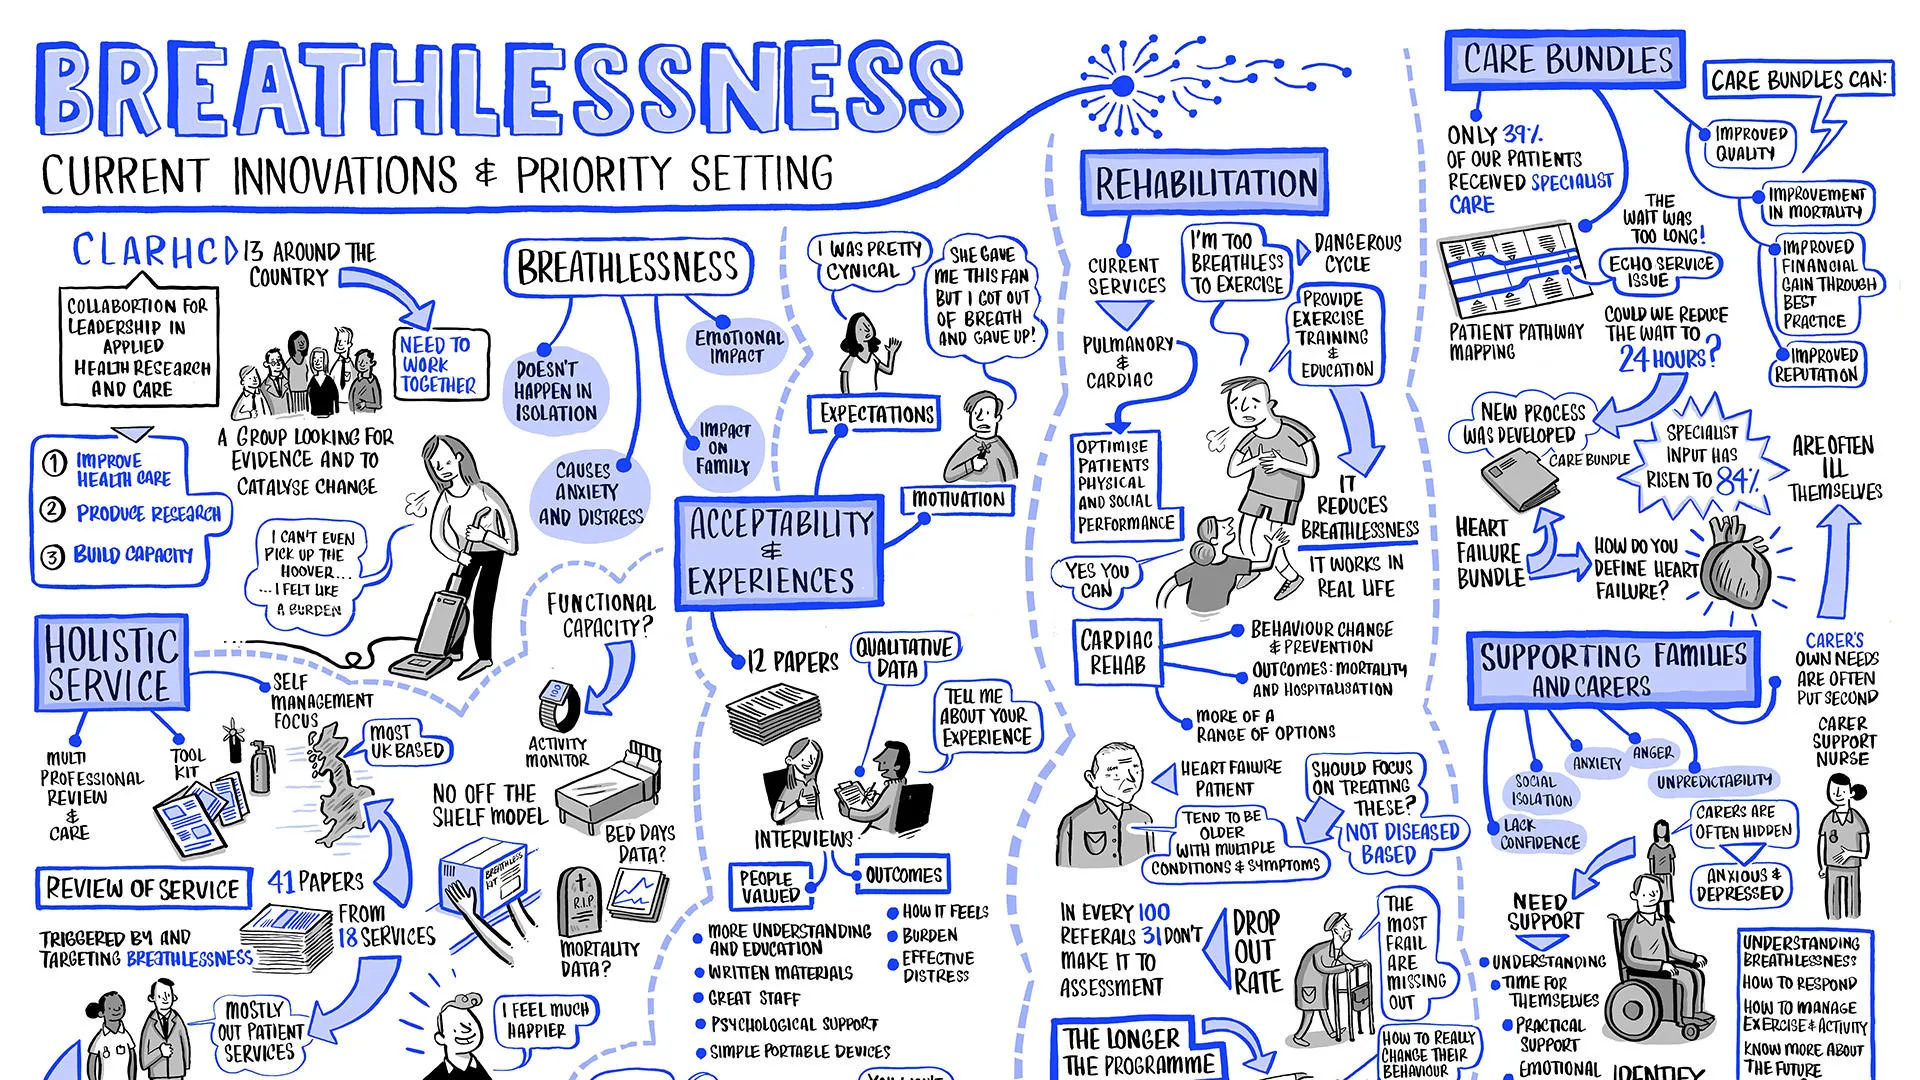 Illustration of ideas for breathlessness research